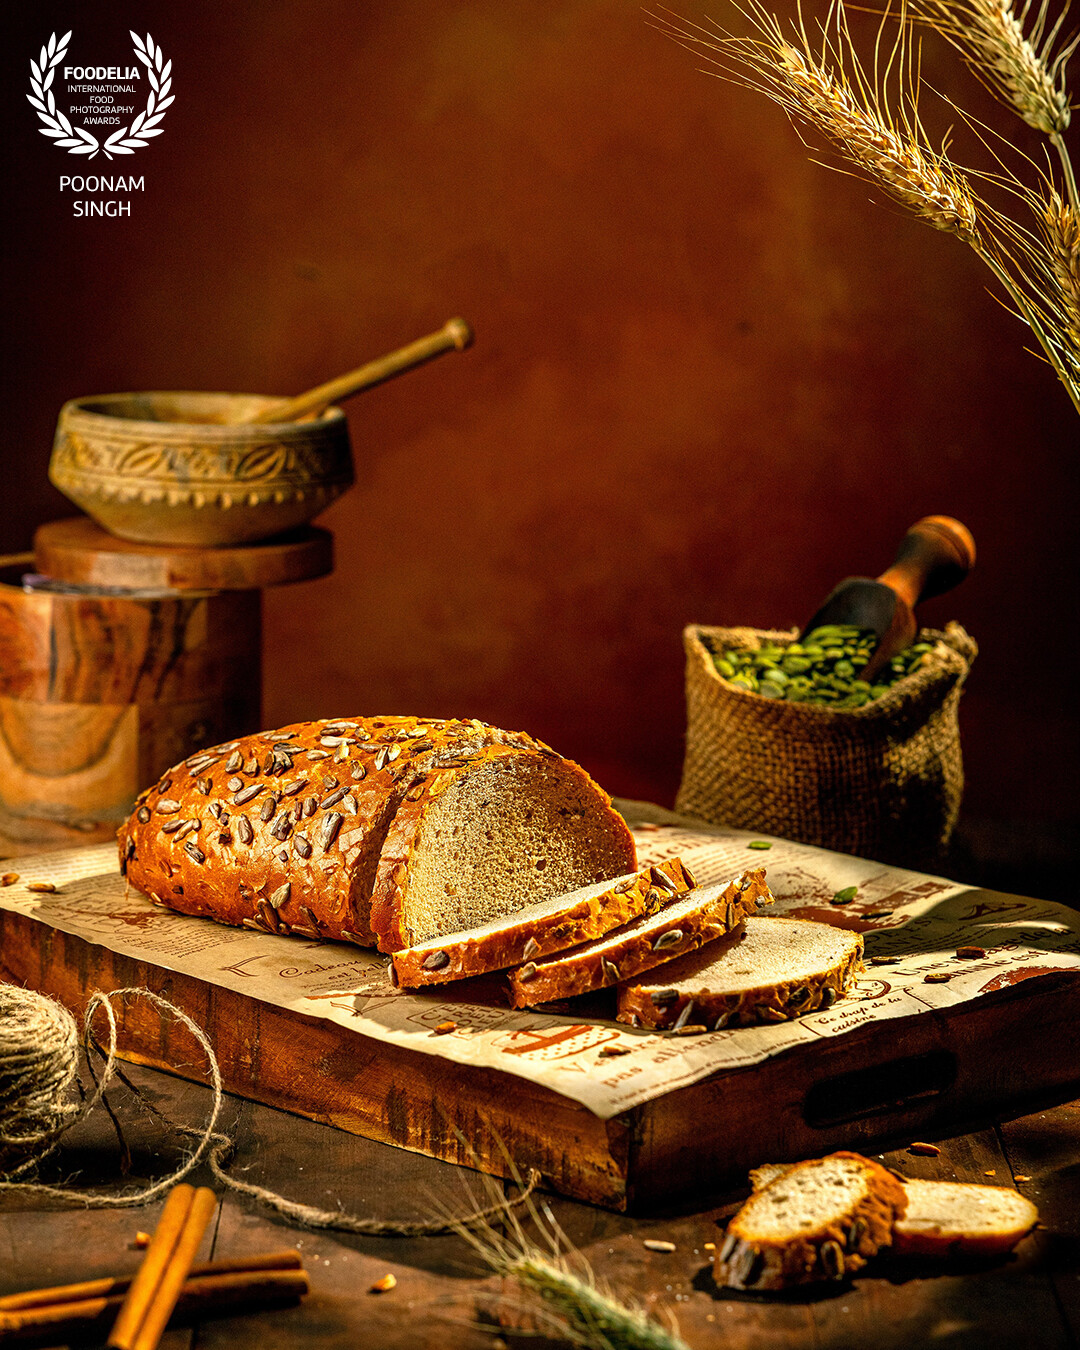 Capture the magic of early mornings with bread photography. The serenity, fresh beginnings, and inviting aroma blend beautifully in captivating images. Explore the art of combining photography with a morning vibe to showcase the warmth and beauty of freshly baked bread.